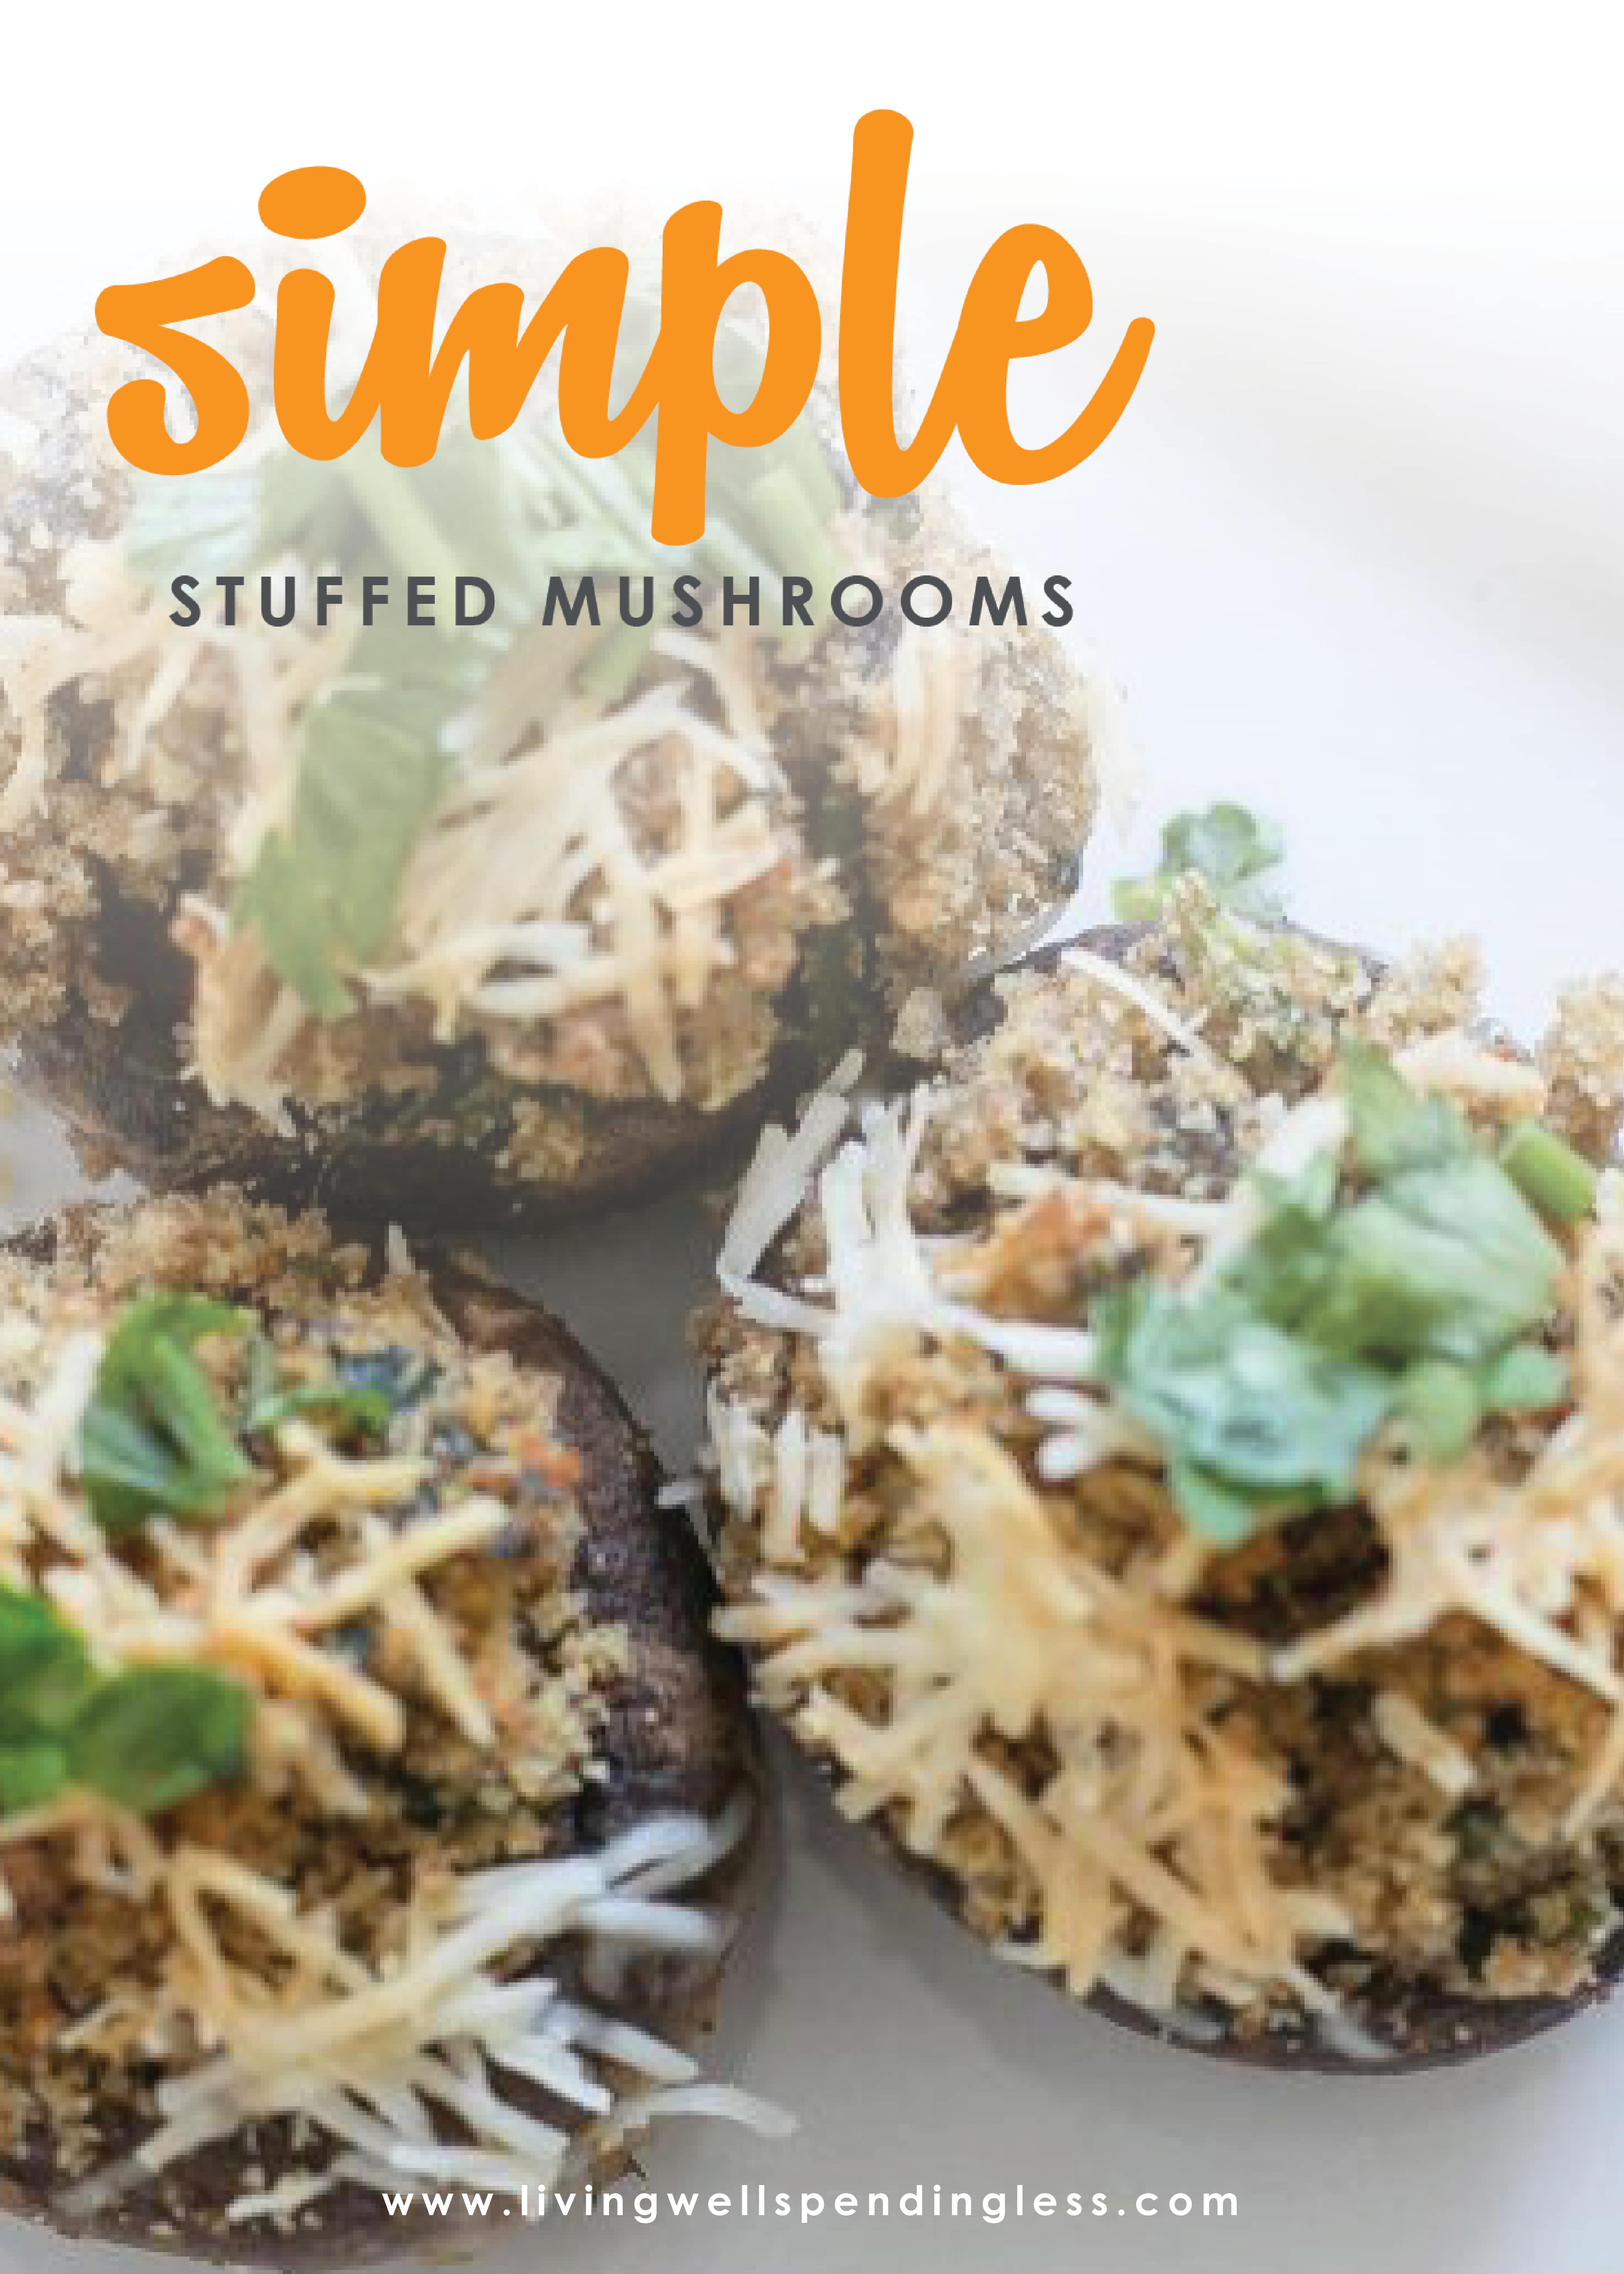 Love mushrooms? These super simple--and ridiculously delicious--stuffed mushrooms will make any day feel like a holiday. Perfect for your holiday menu, or maybe just because!